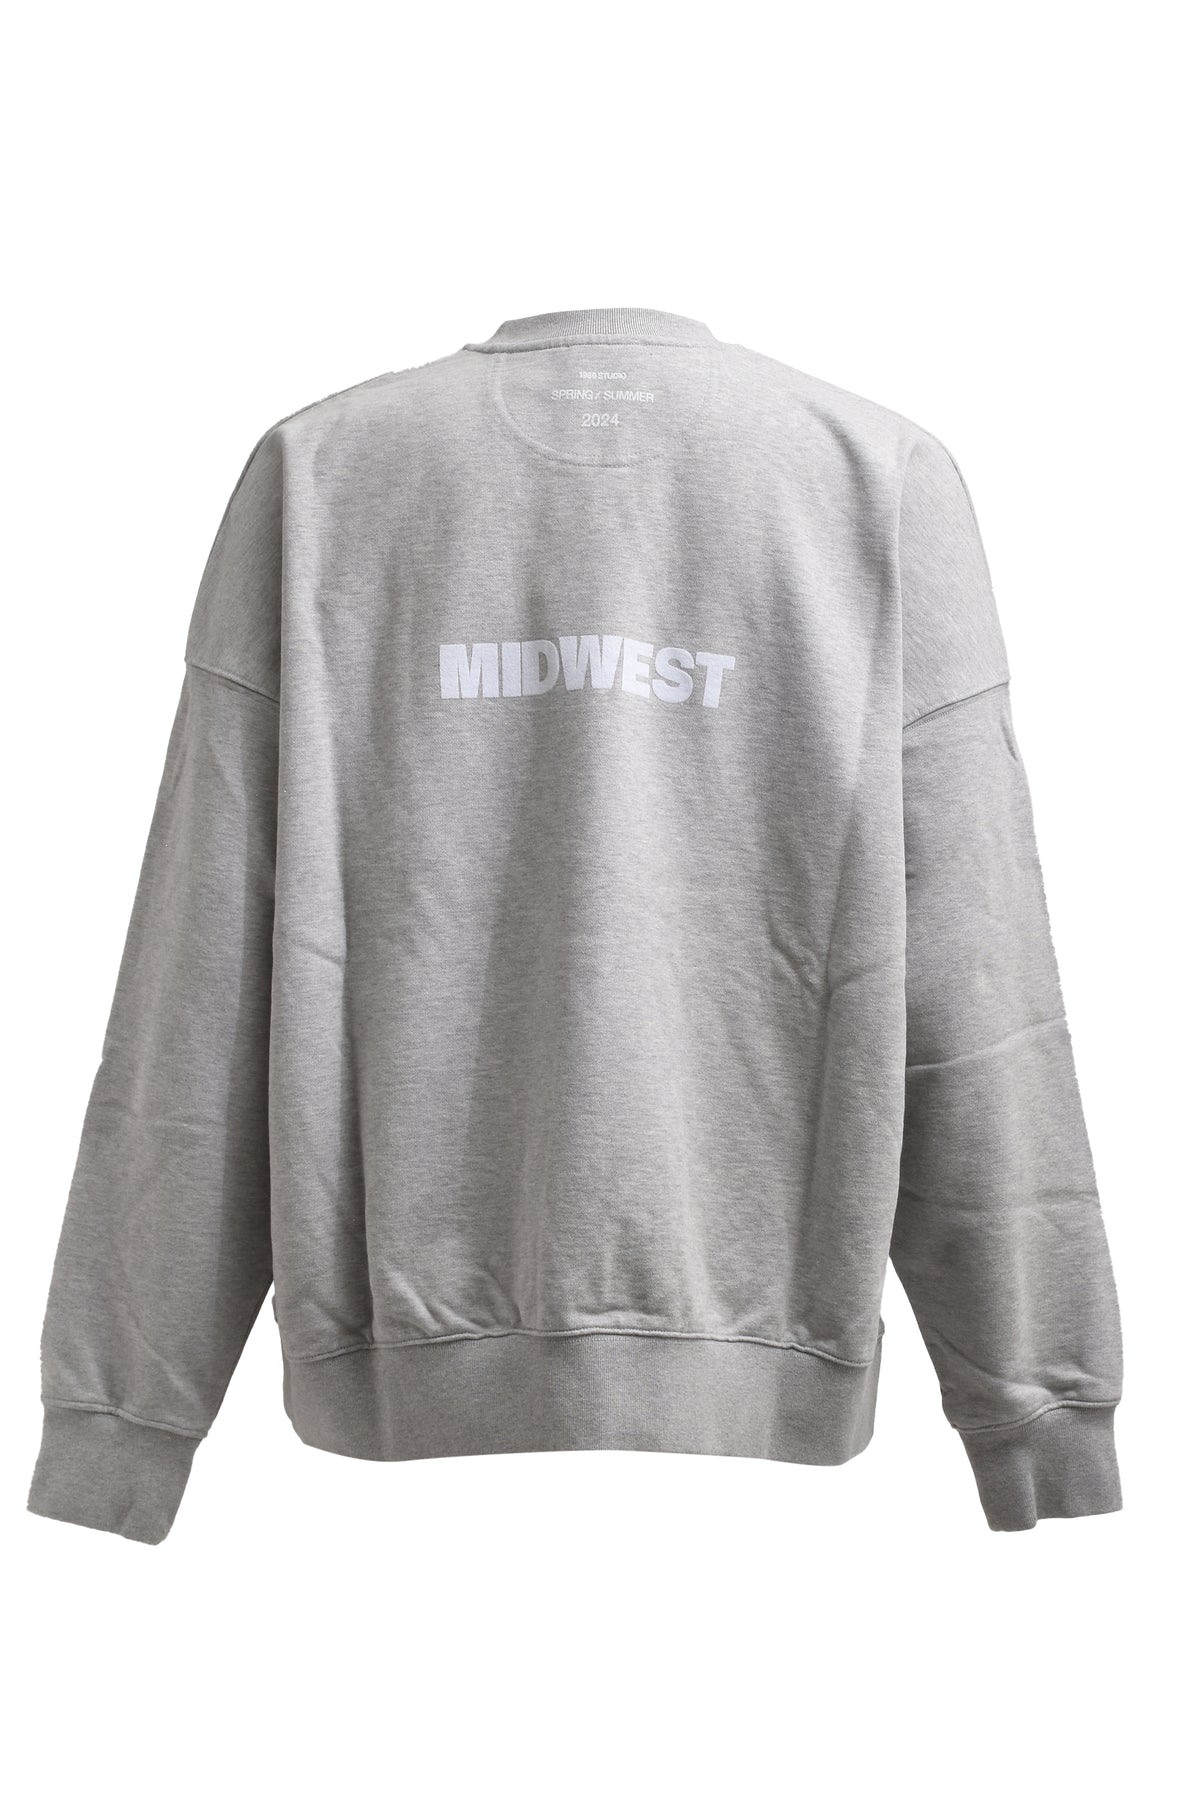 MIDWEST RELAXED SWEATSHIRT / OAT GRY